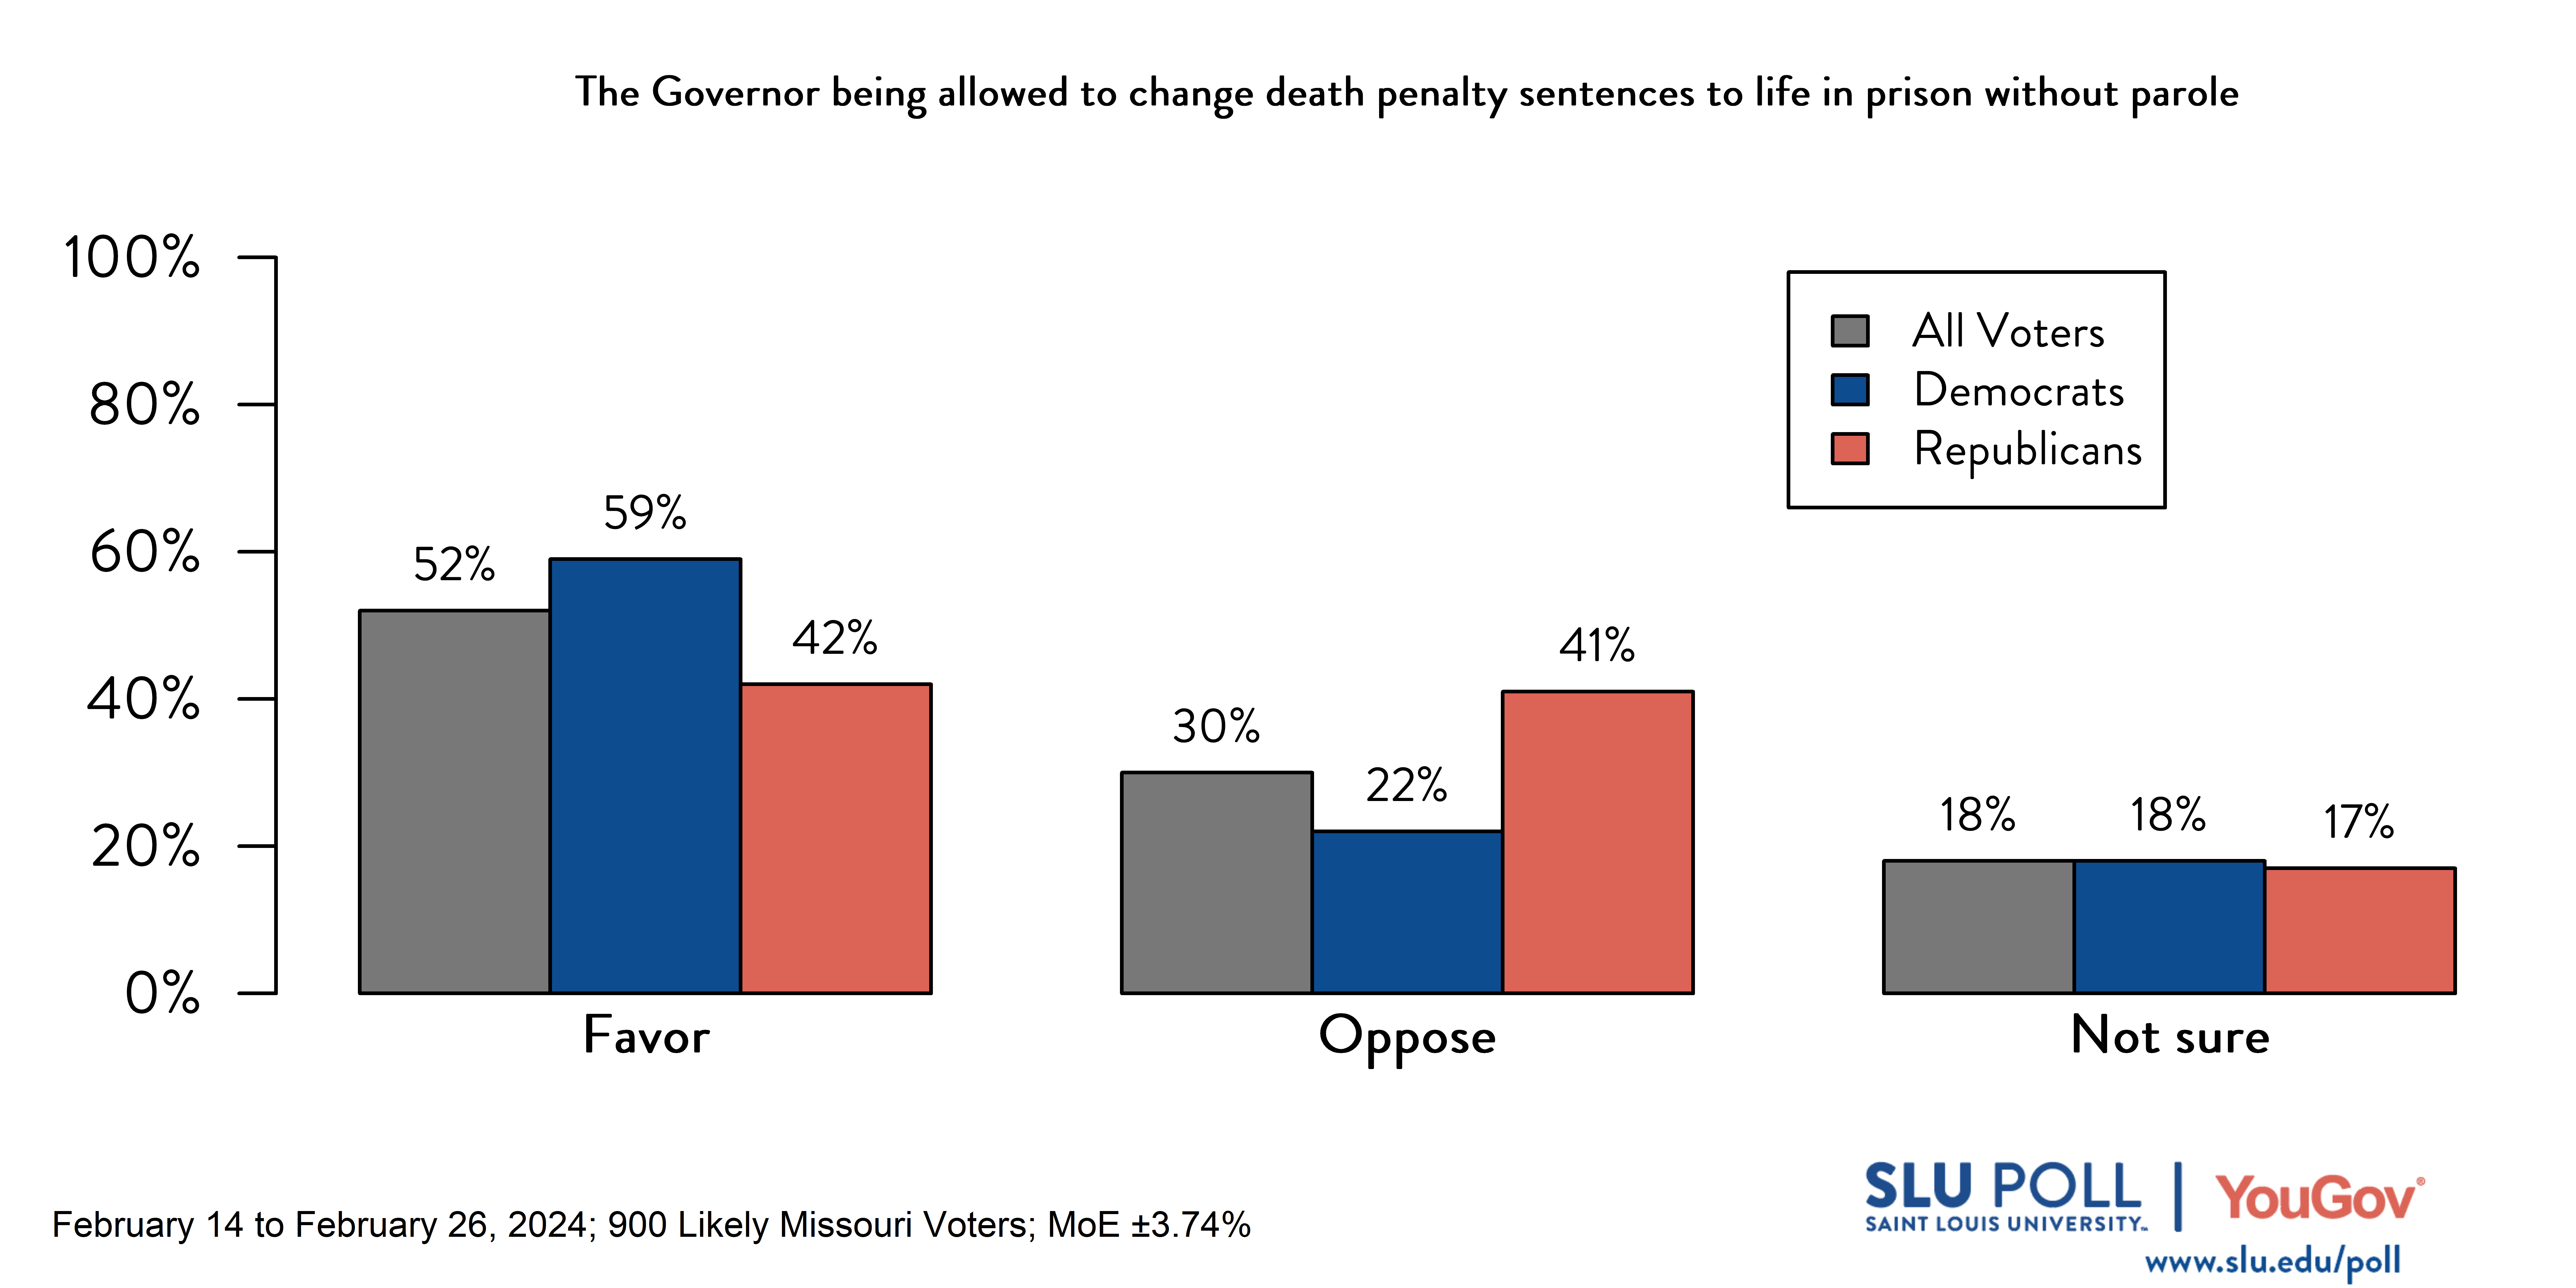 Bar graph of SLU/YouGov Poll results for death penalty commutation question. Results in caption